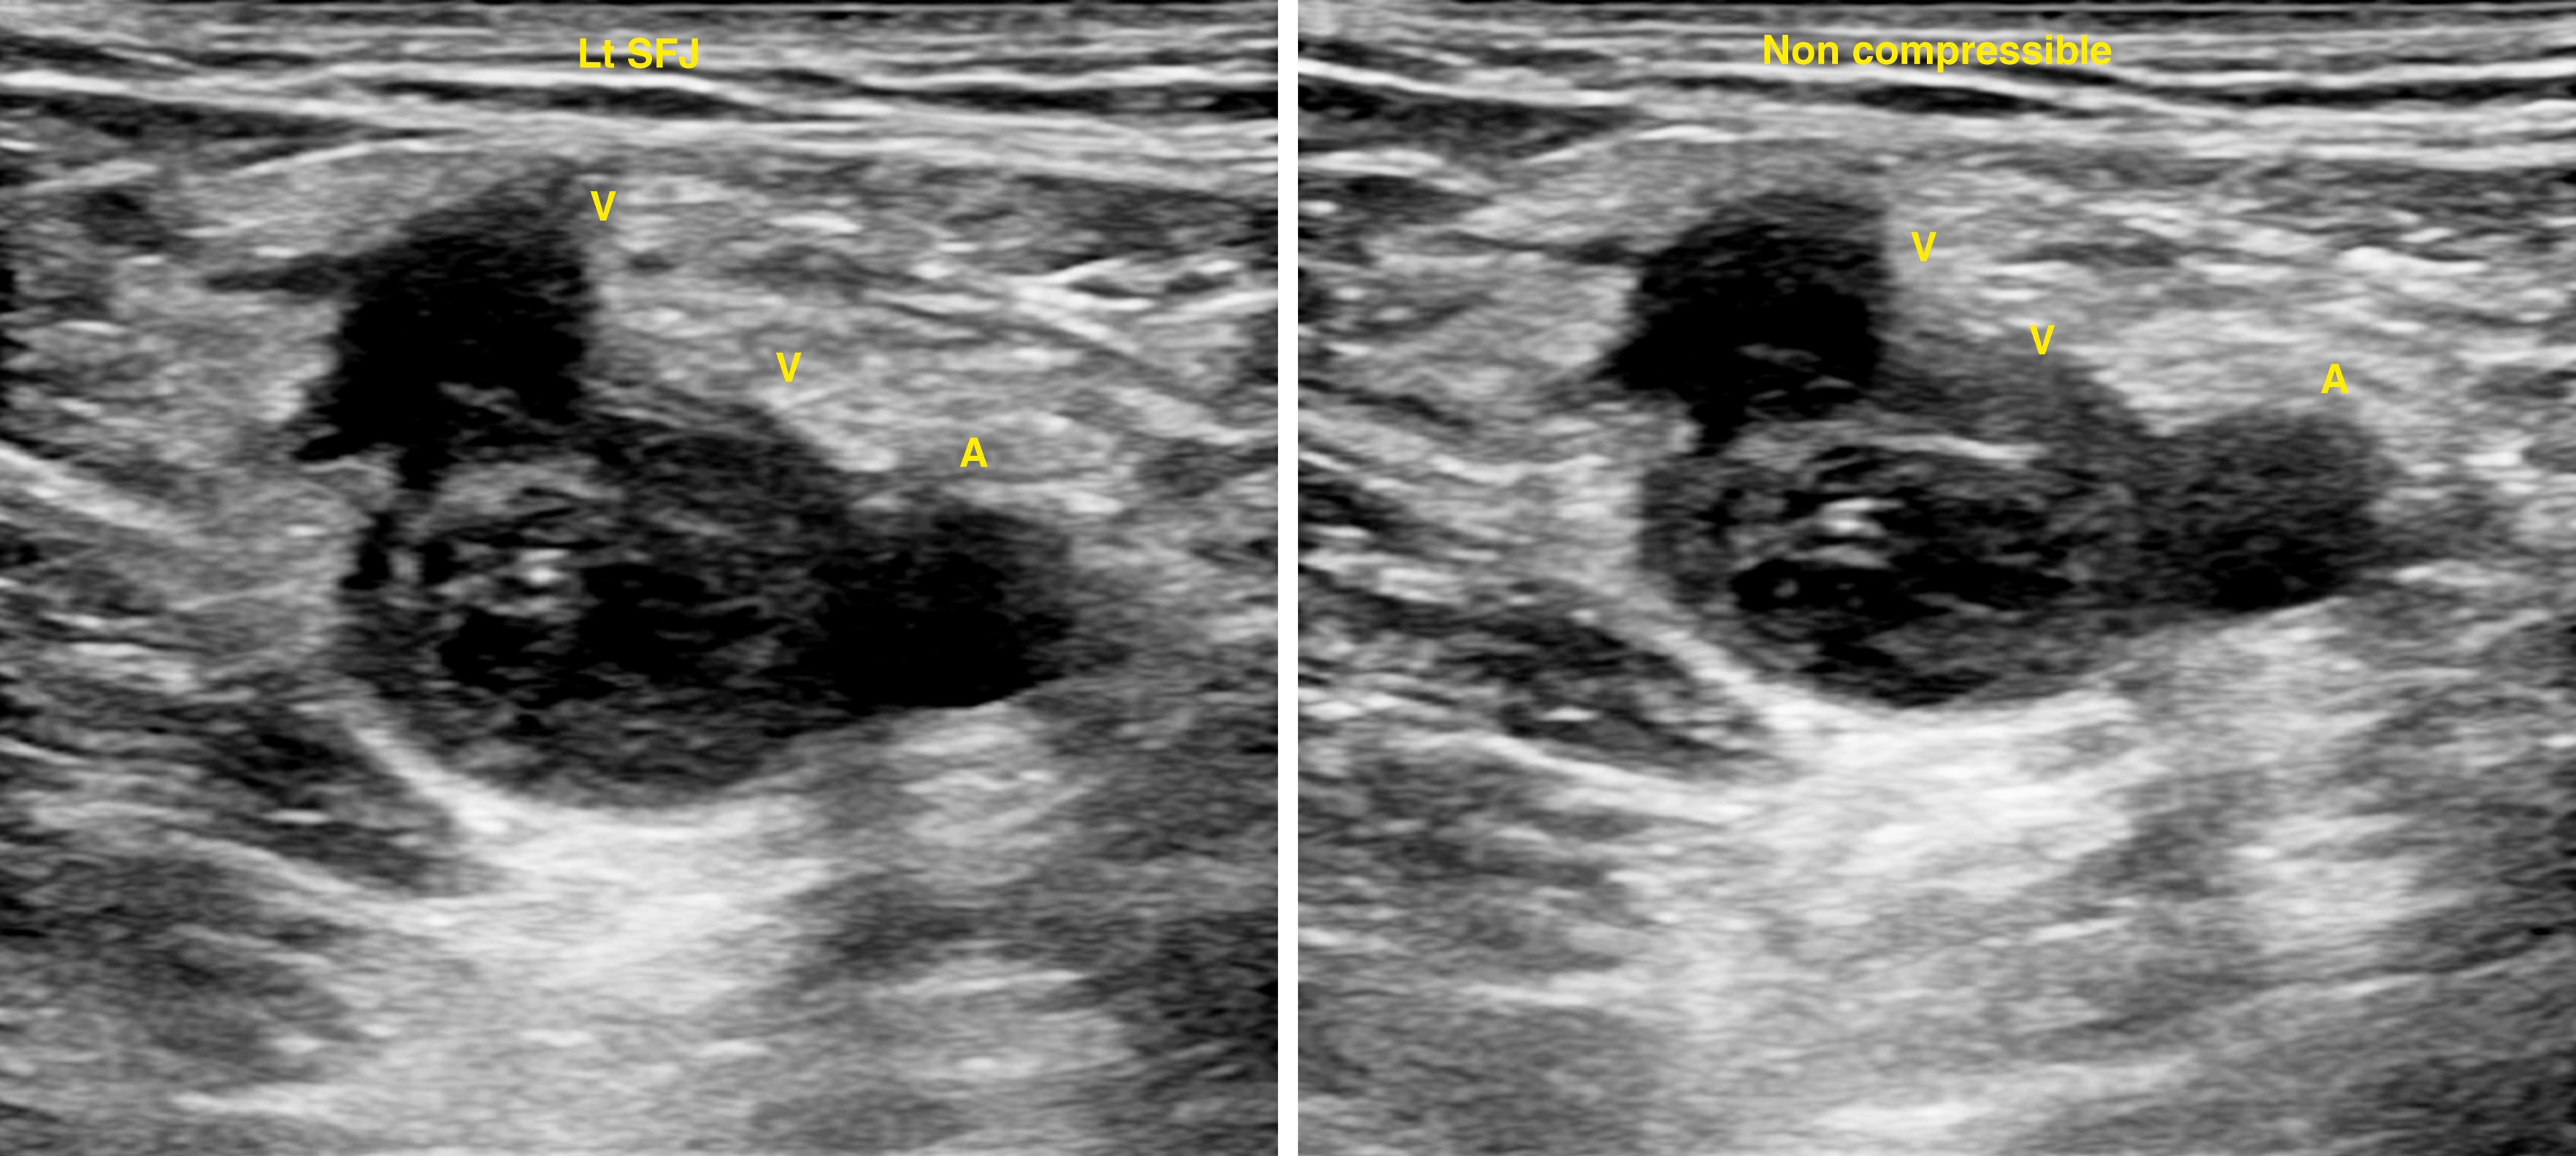 Figure 148.1, Totally Occluding, Acute Common Femoral Vein (CFV) Thrombosis.